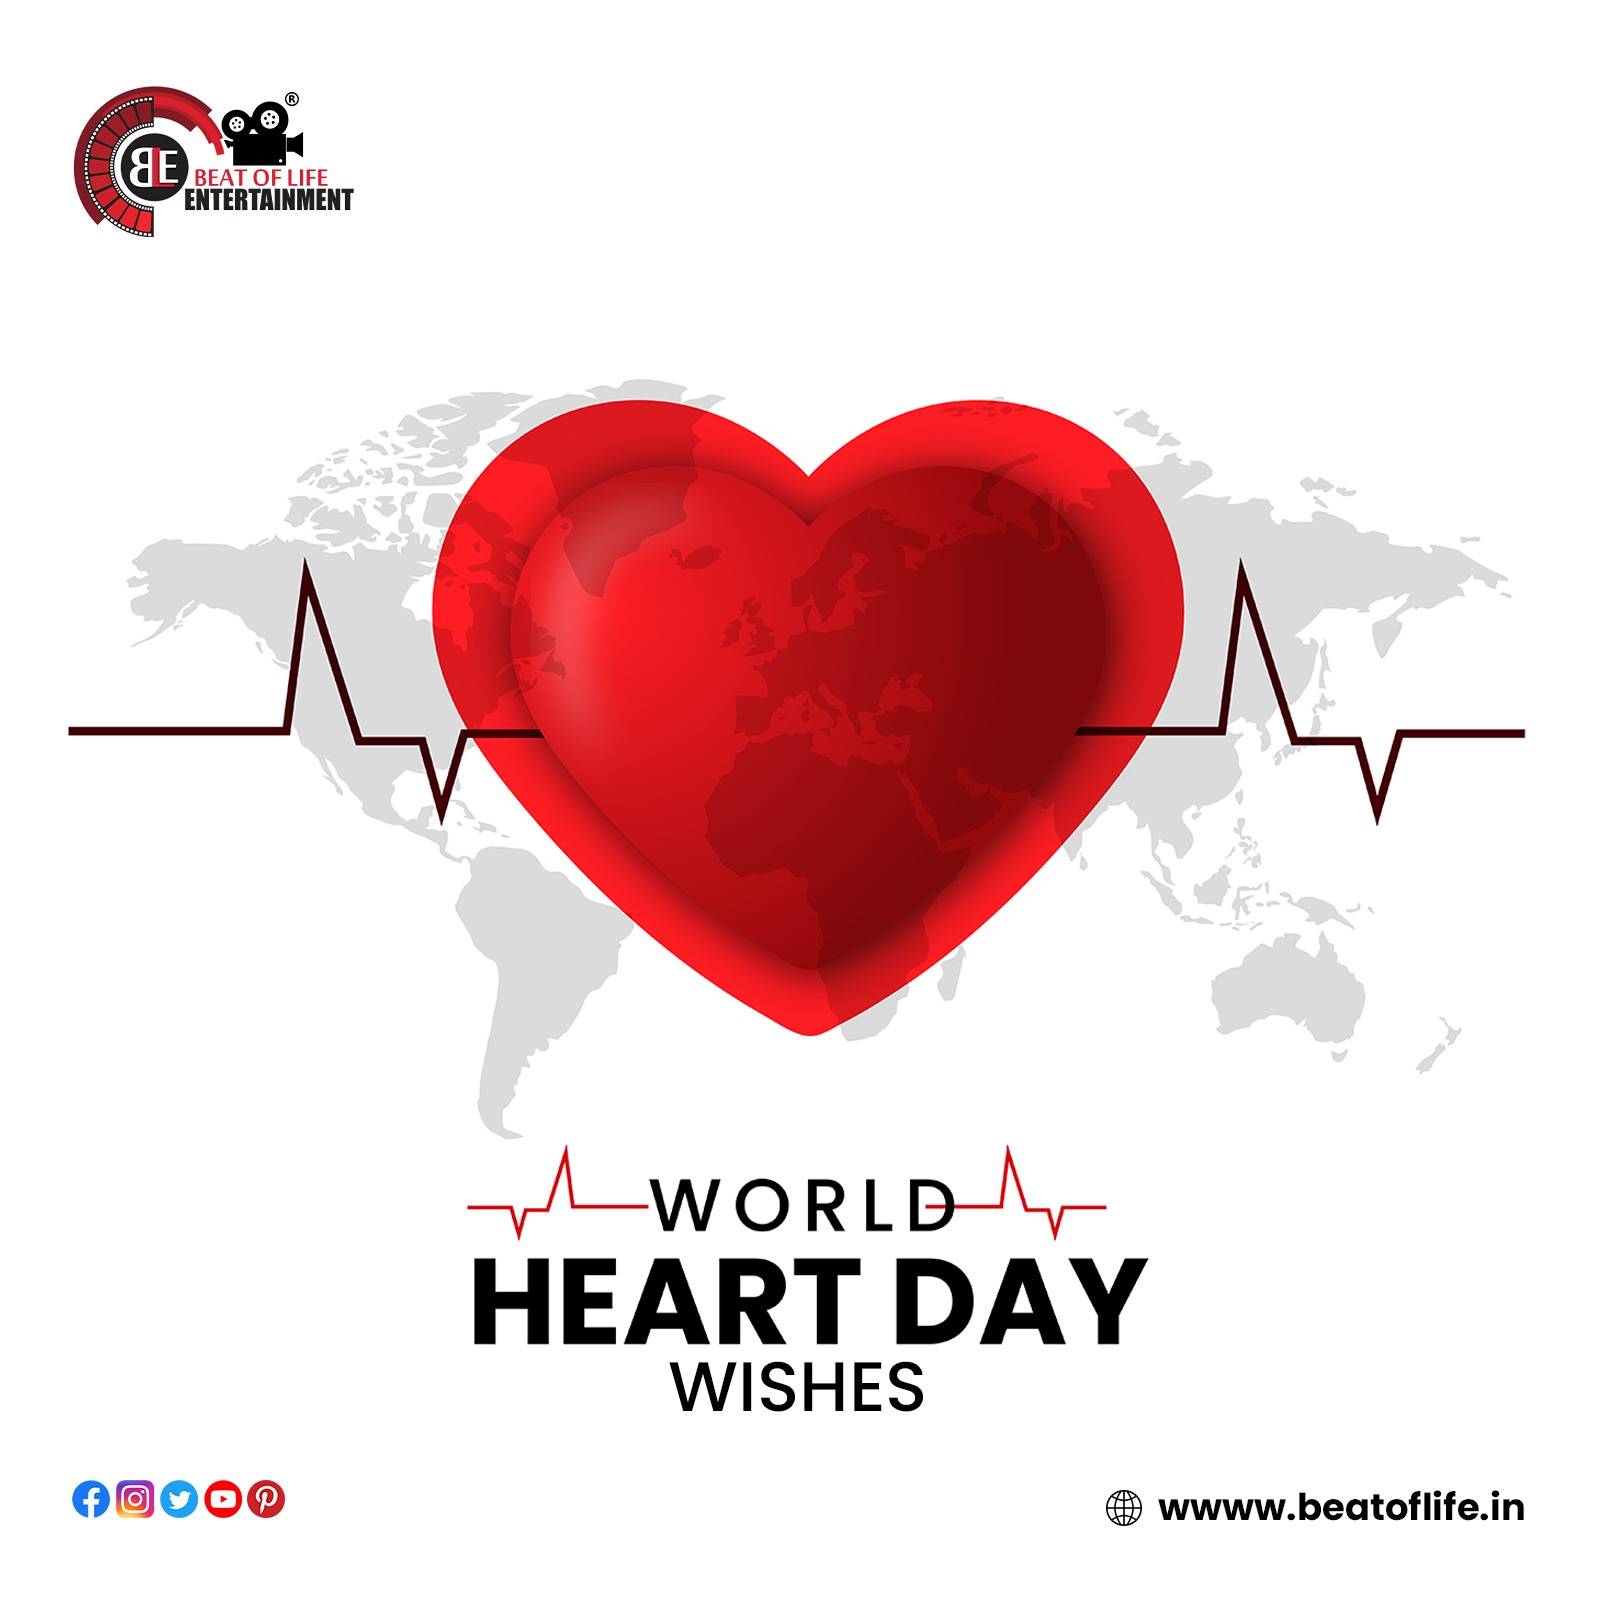 World Heart Day wishes